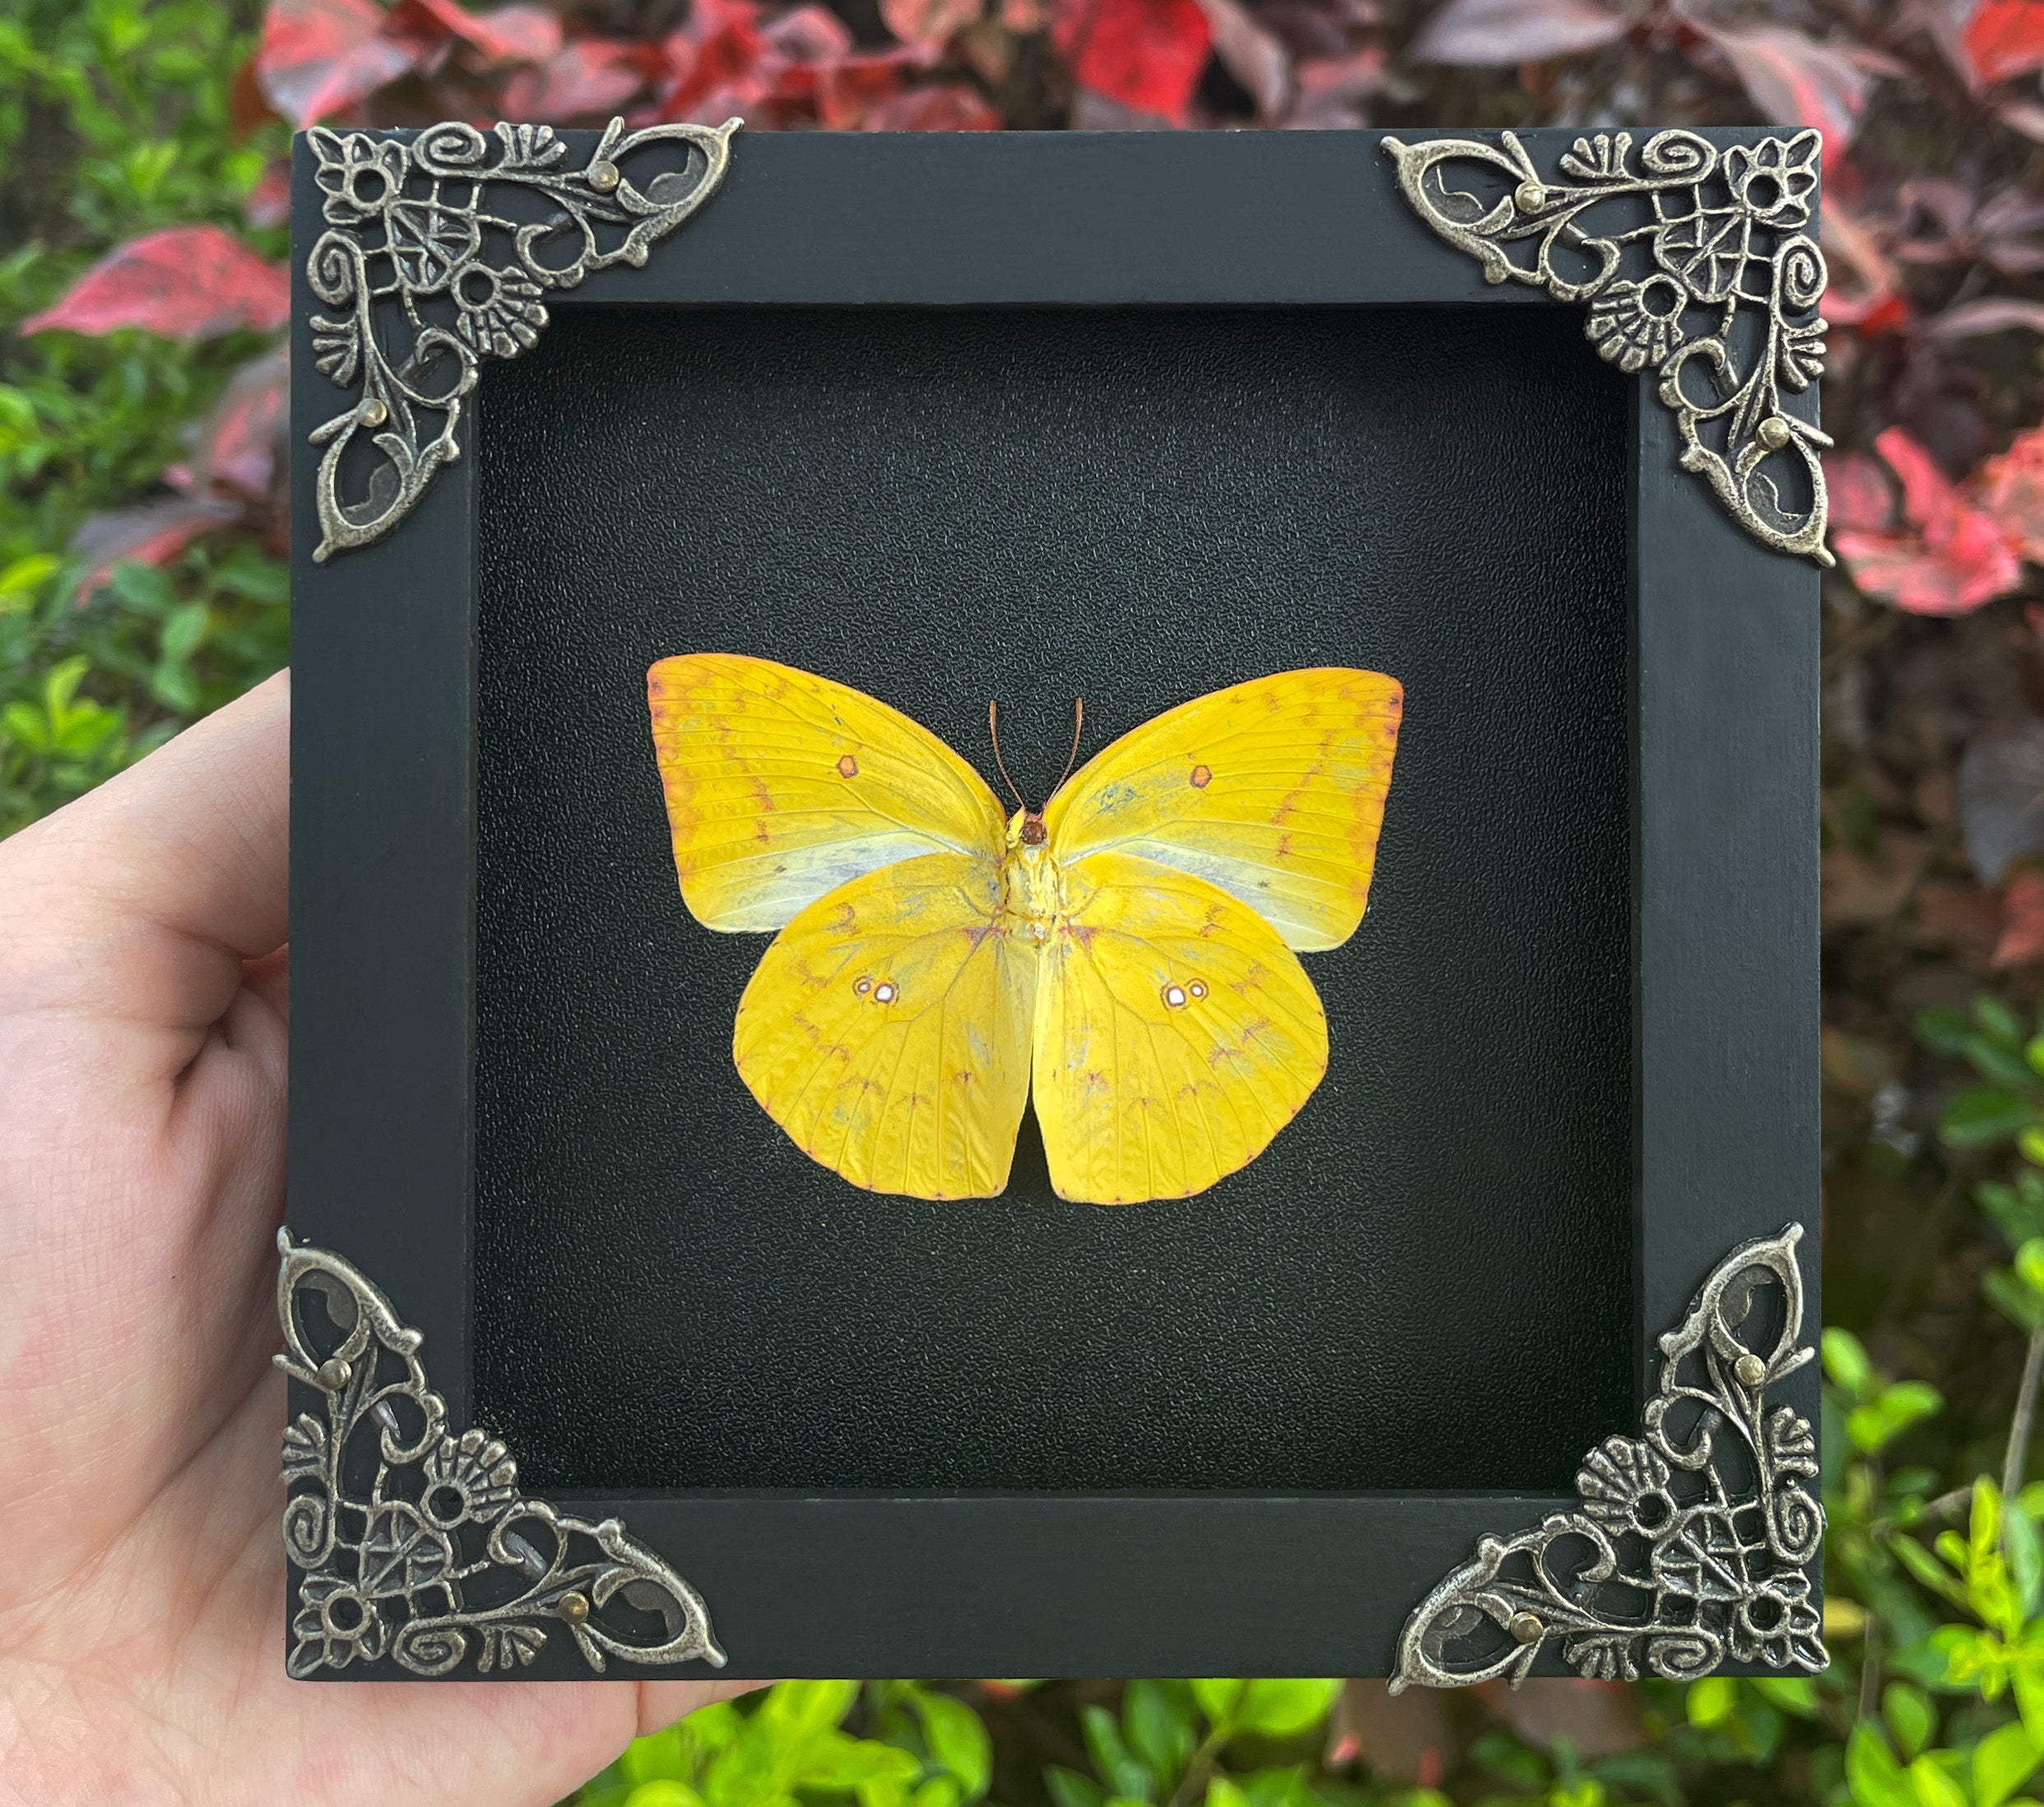 Framed Butterfly Taxidermy Wall Hanging Decor Preserved Butterflies Insect Specimen Entomology Gift K12-43-DE